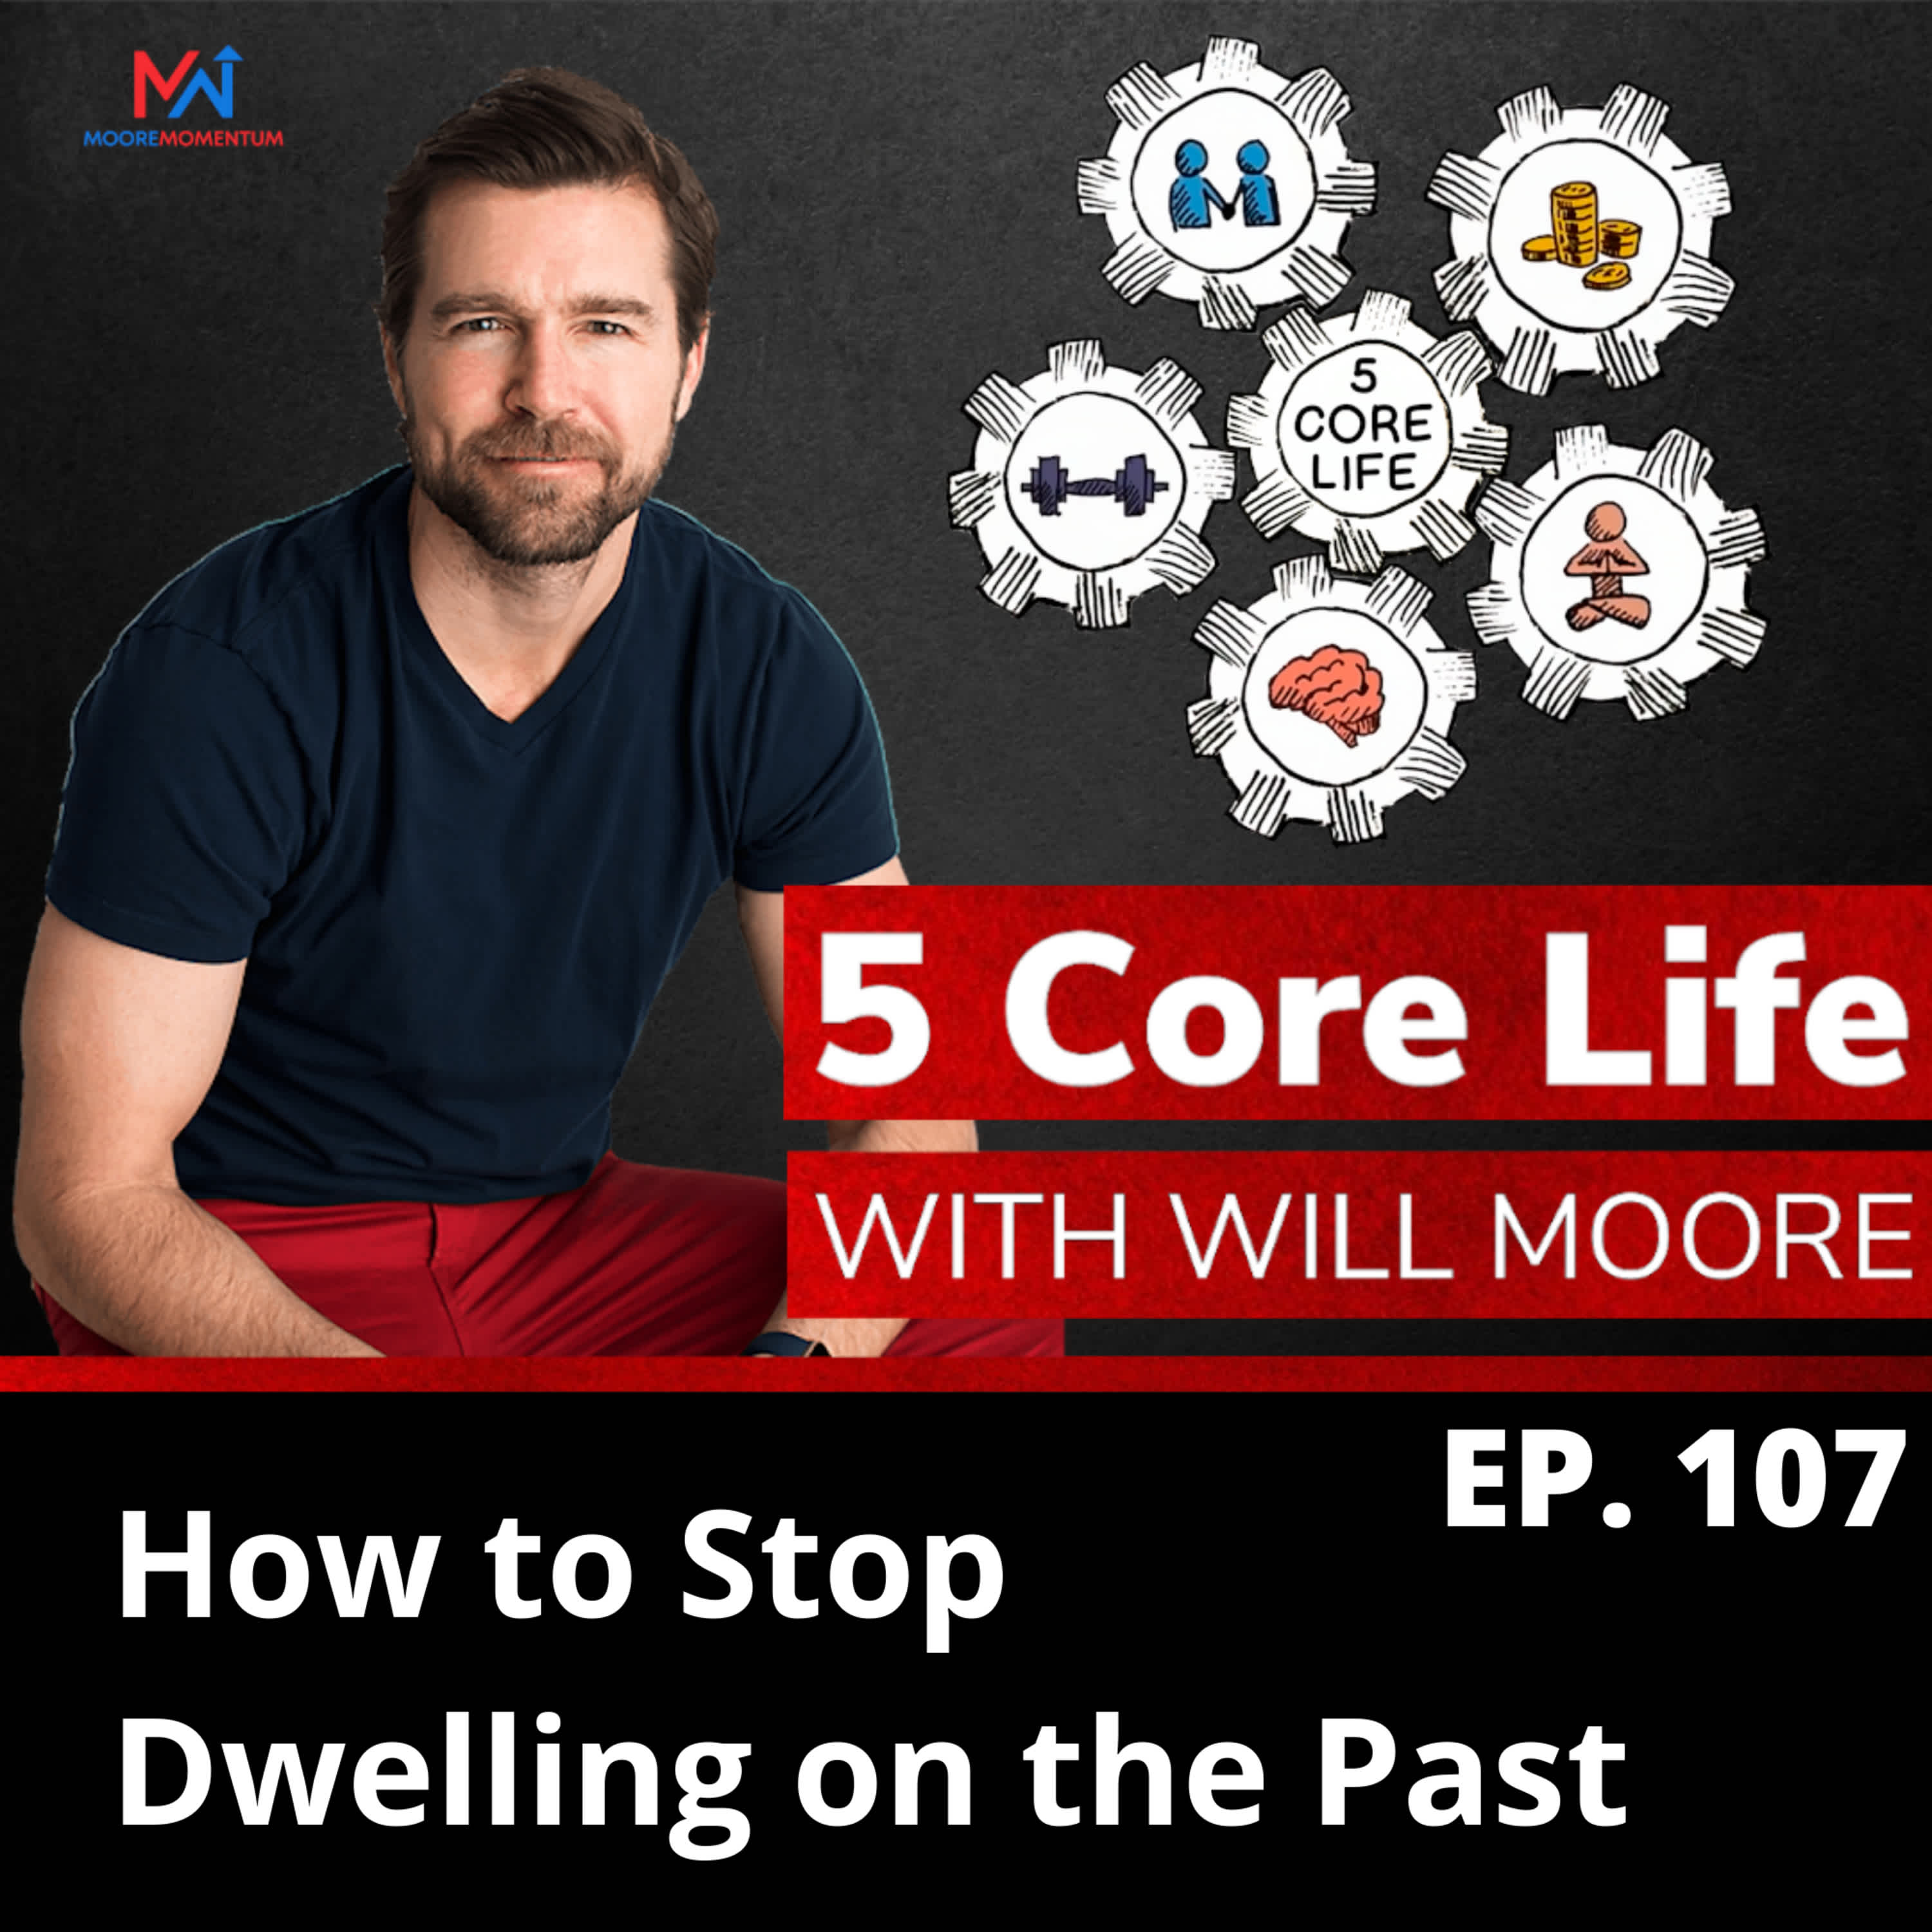 How to Stop Dwelling on the Past